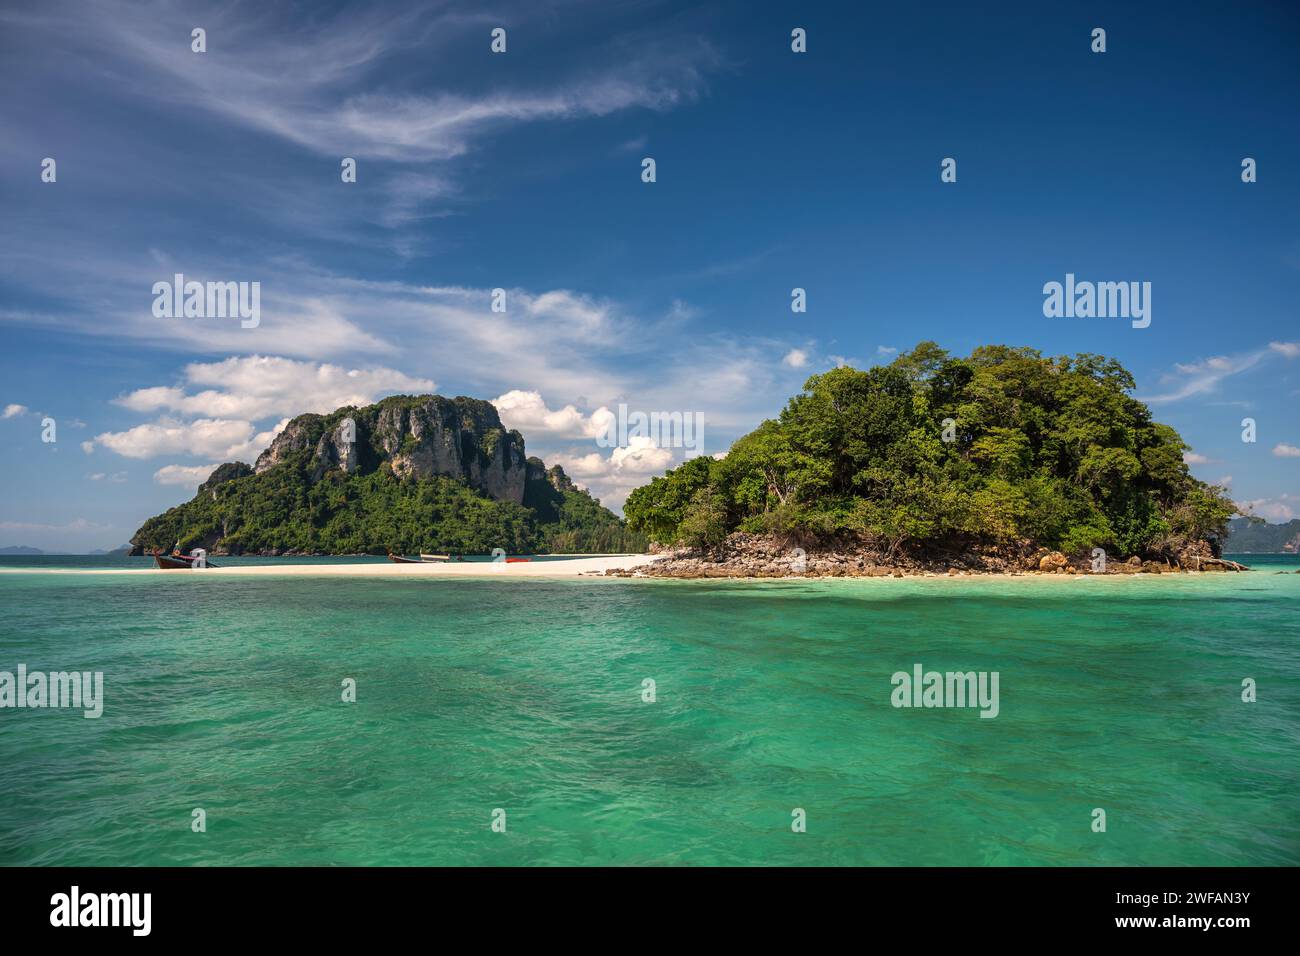 Tropical islands view with ocean blue sea water and white sand beach at Thale Waek (Separated Sea), Krabi Thailand nature landscape Stock Photo